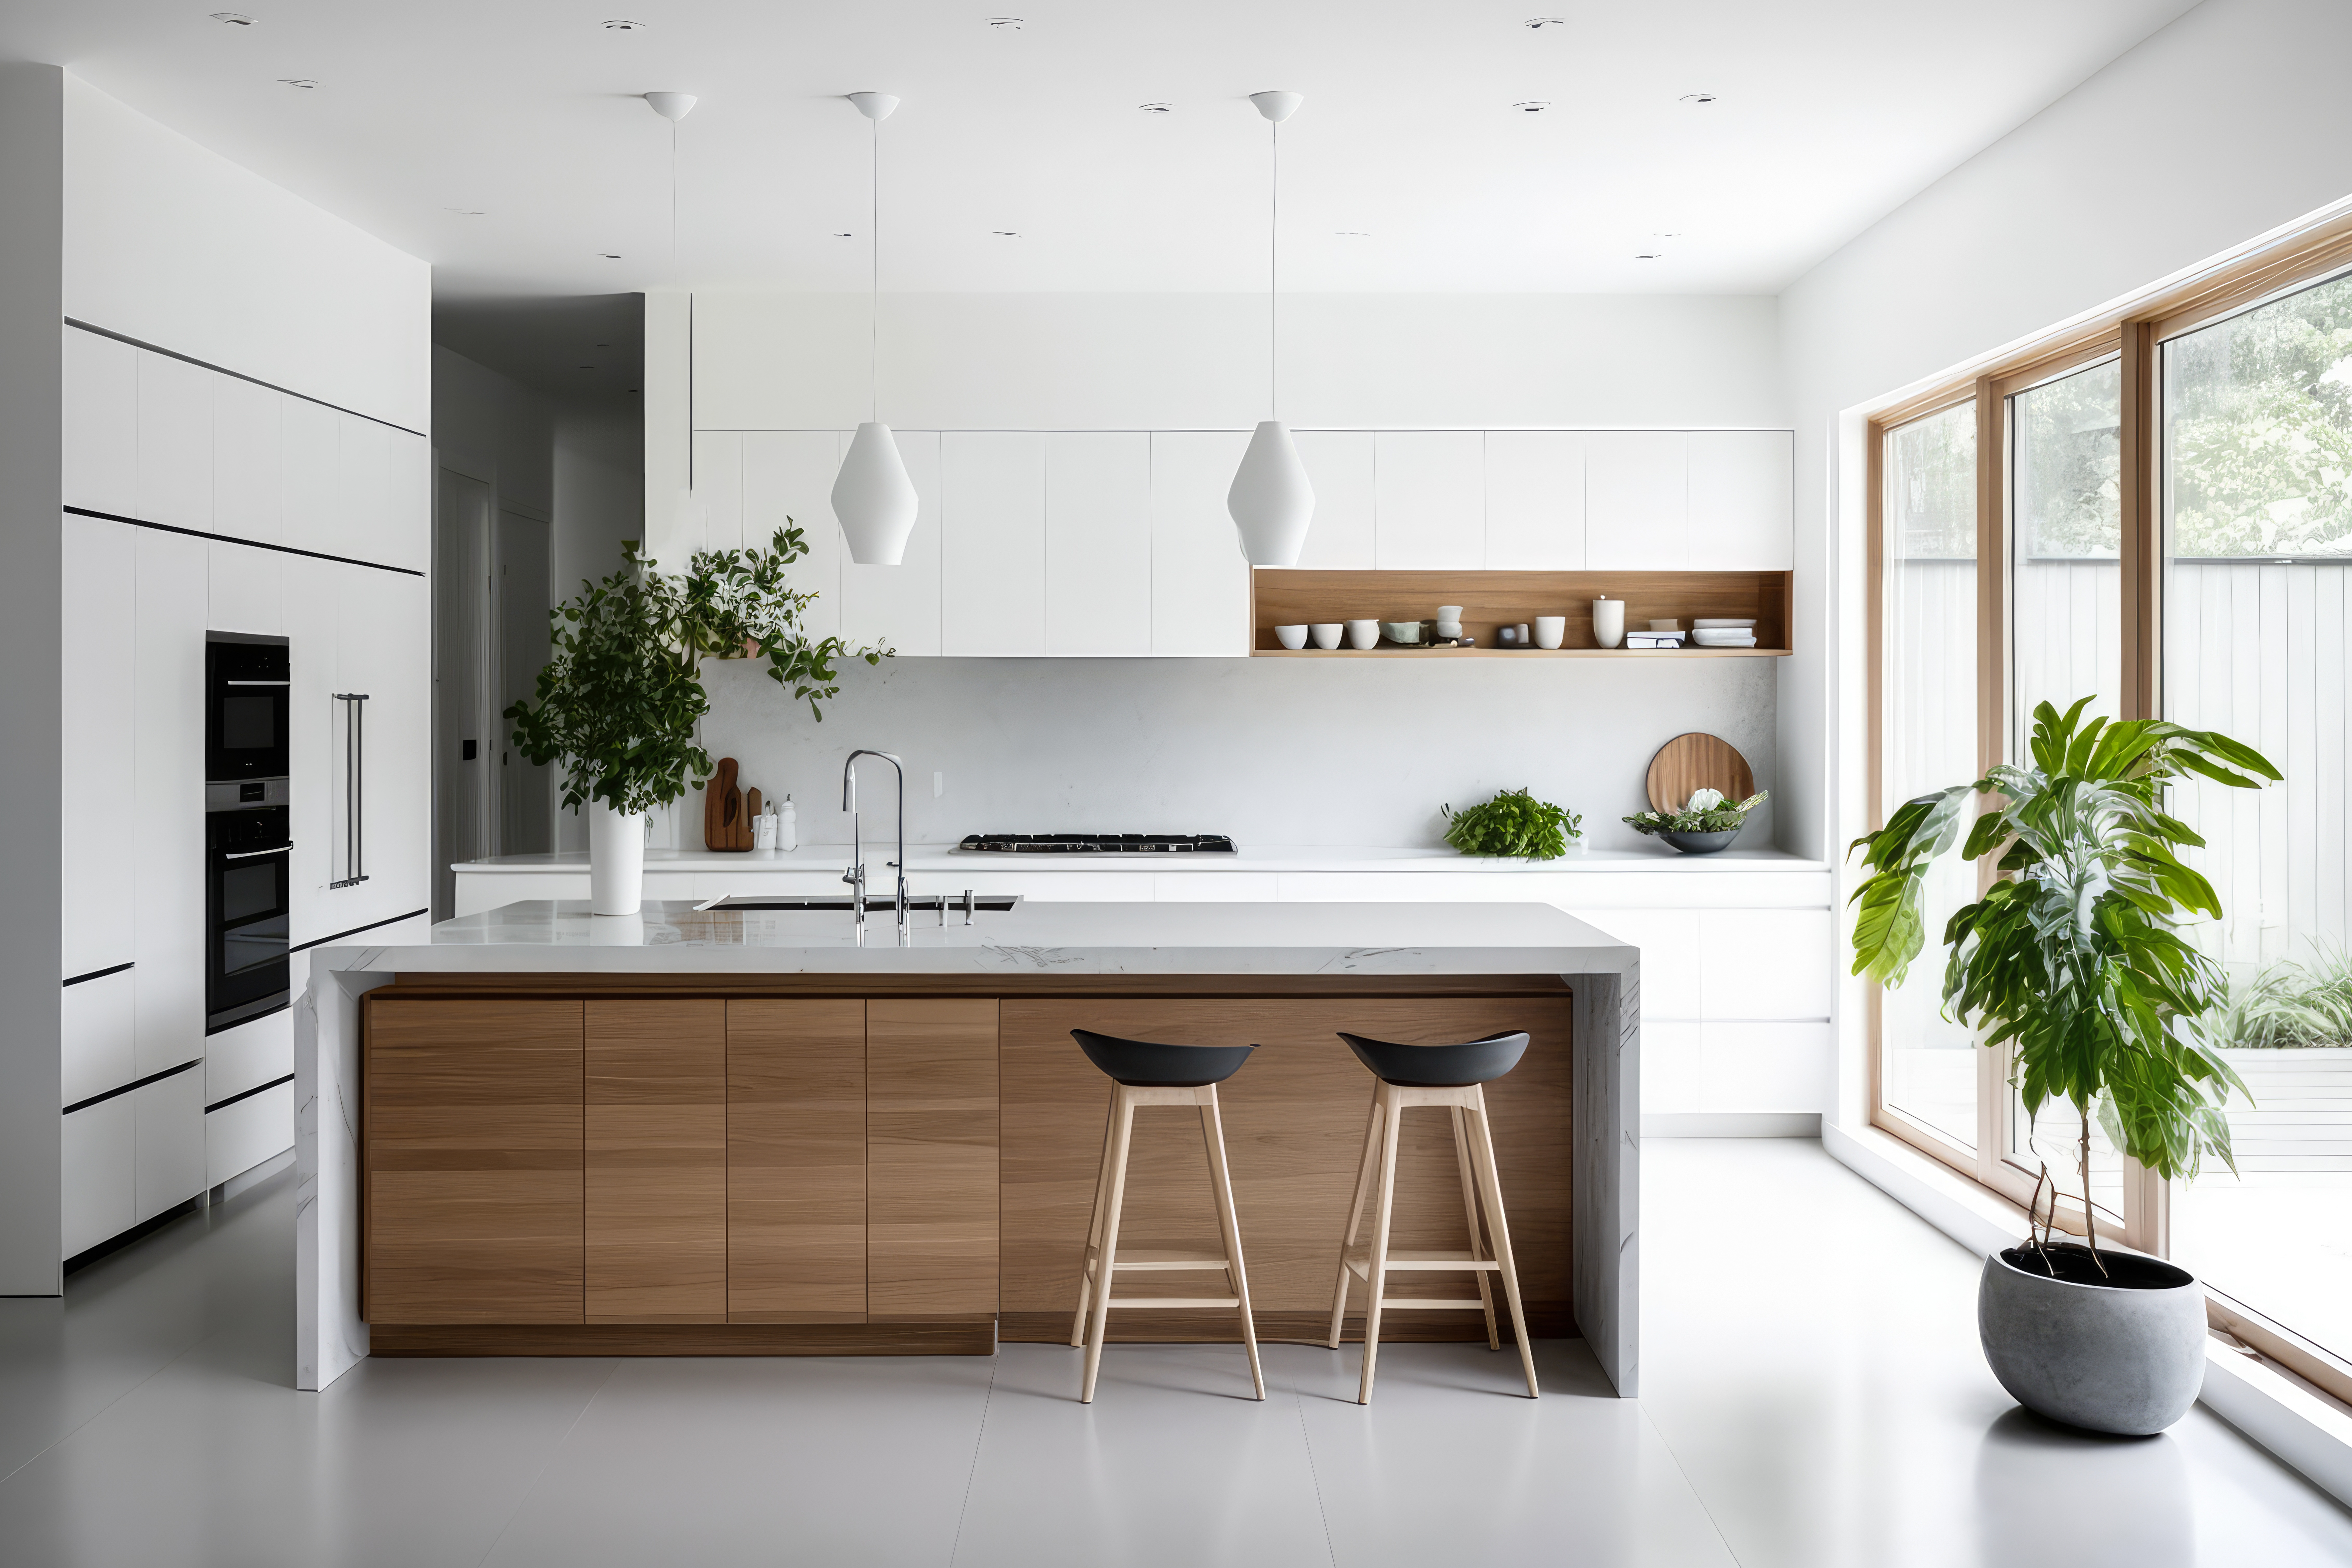 Timeless minimalist kitchen design with a wooden island and white cabinetry